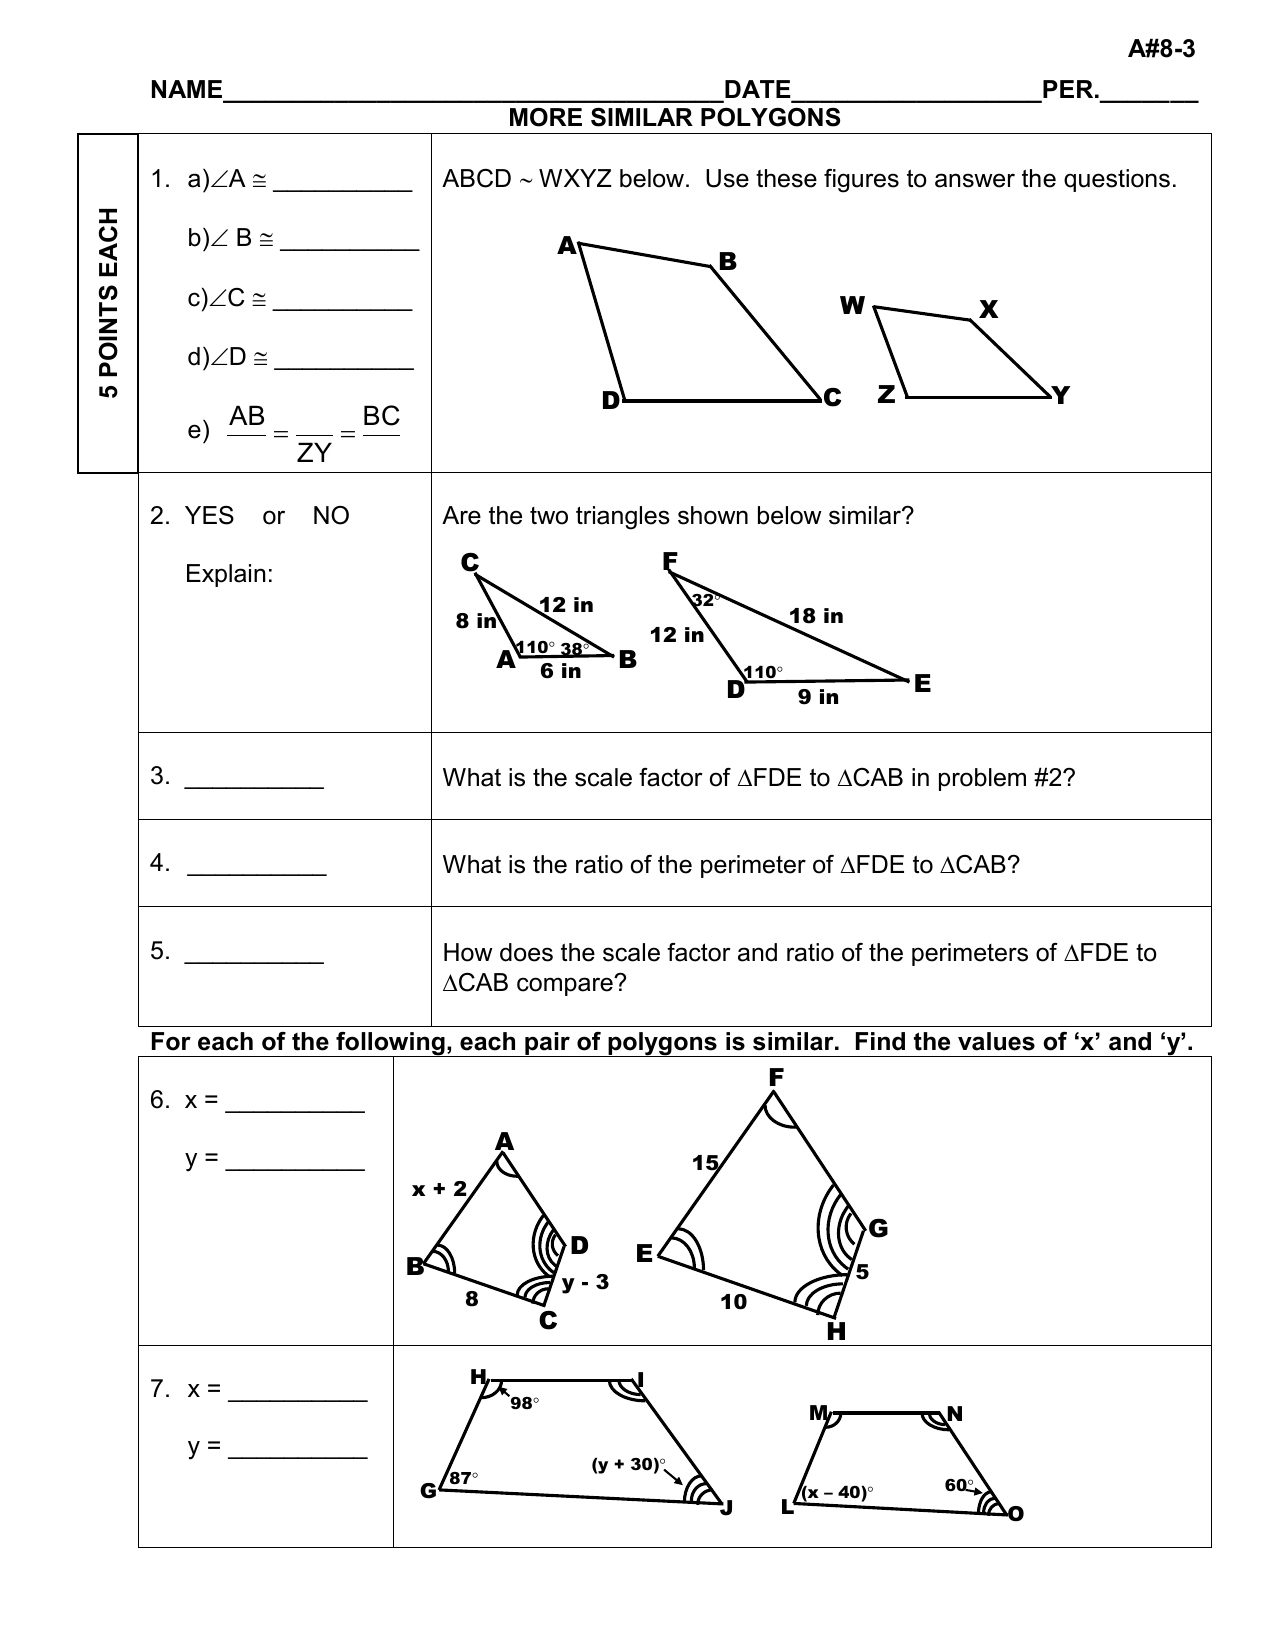 More Similar Polygons As Well As Similar Polygons Worksheet Answers